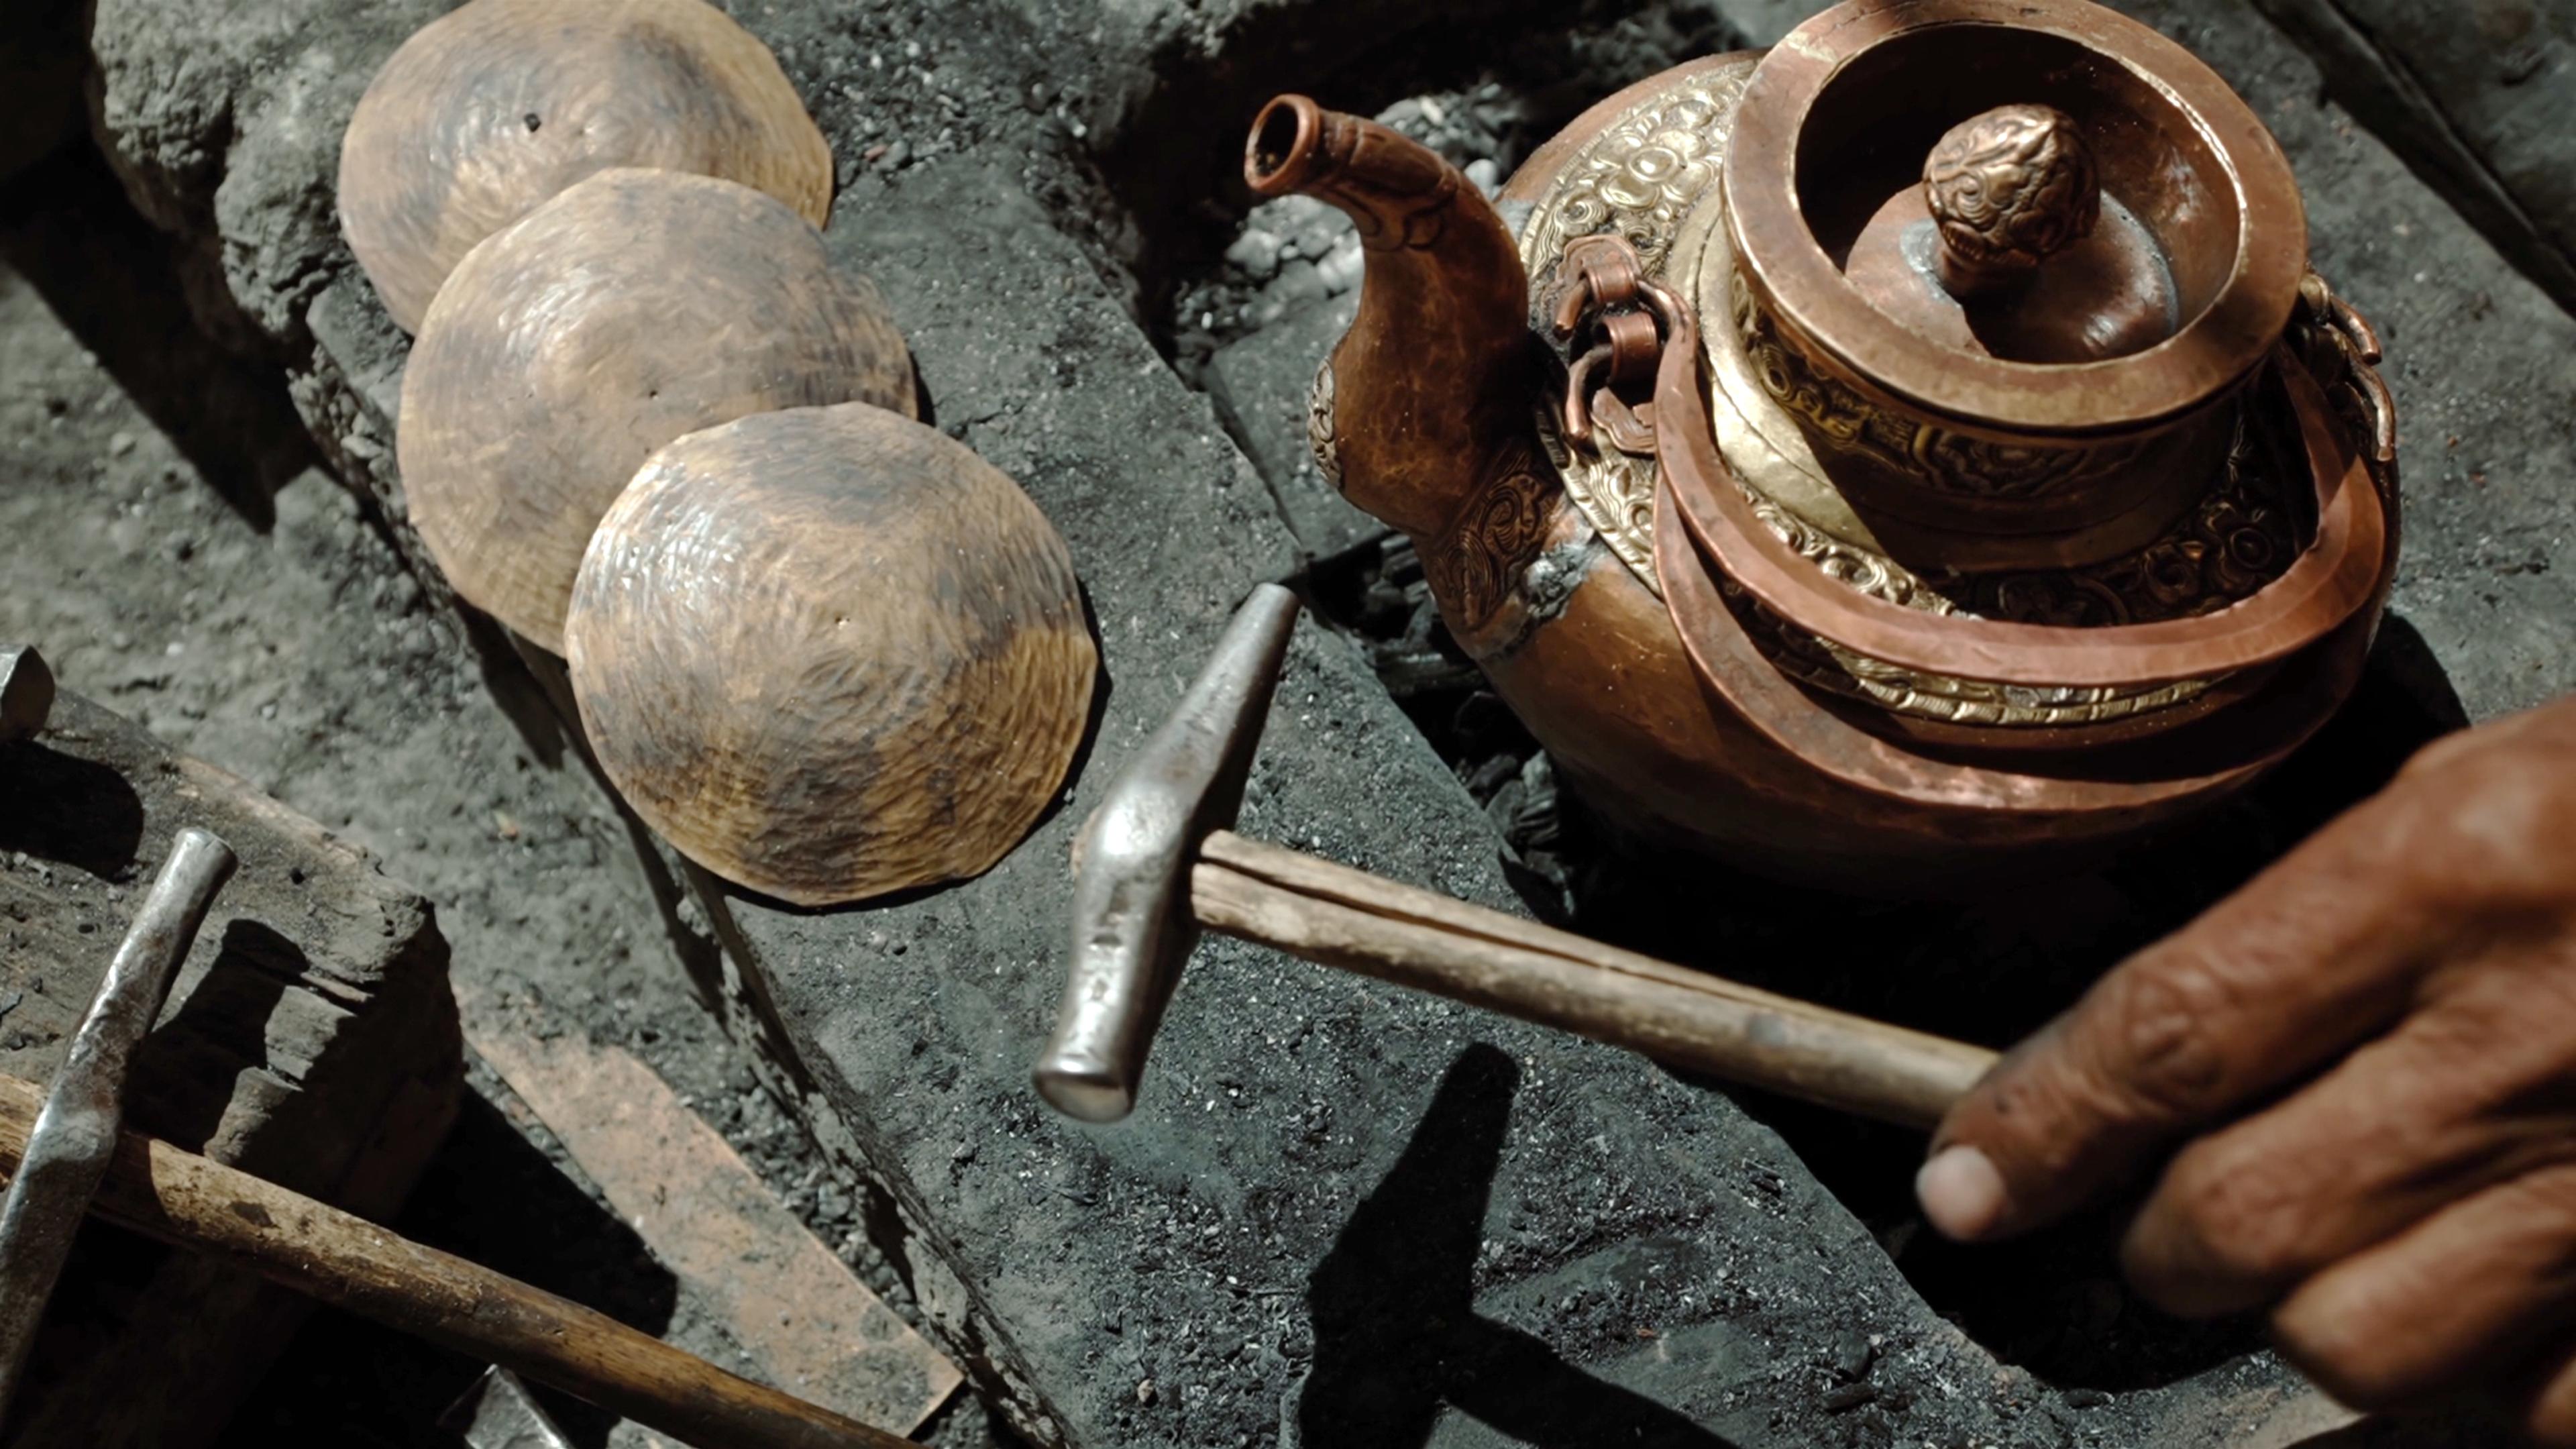 Close-up of a hammer, metal pot, and three rounded wooden objects on a stone surface, with a hand holding the hammer.